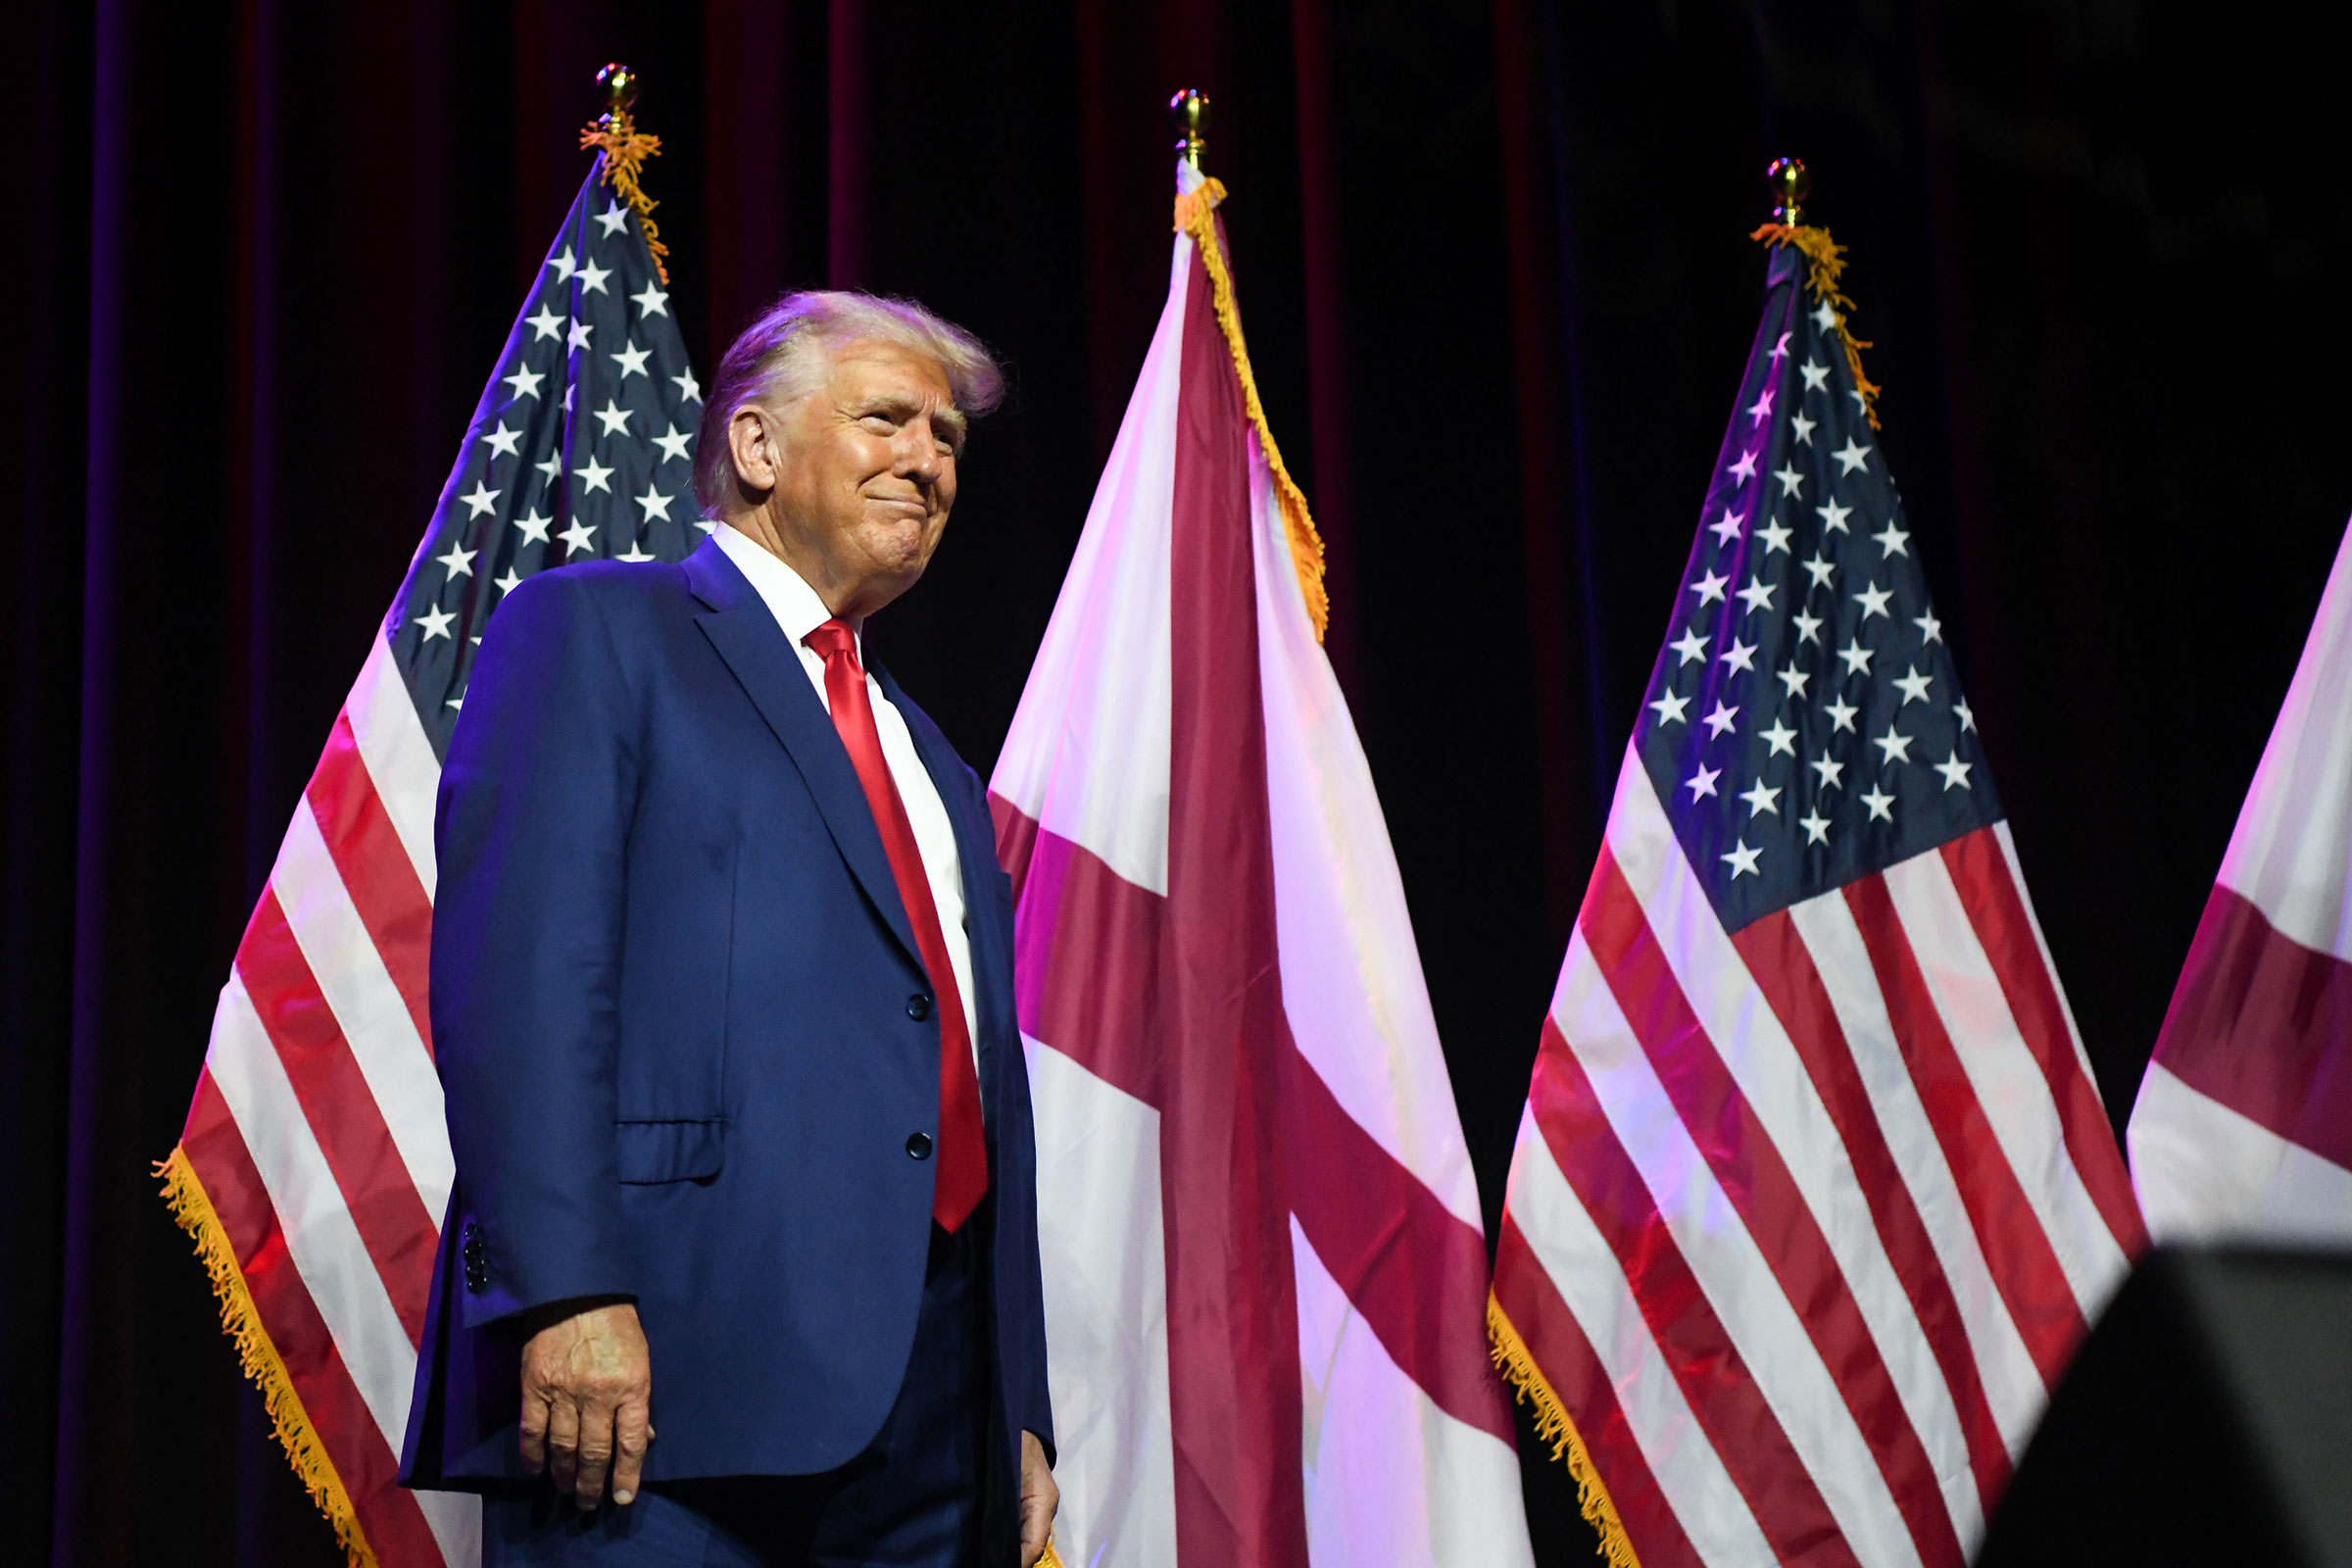 Former President Donald Trump looks on during the Alabama Republican Party’s 2023 Summer meeting at the Renaissance Montgomery Hotel on August 4, 2023 in Montgomery, Alabama.